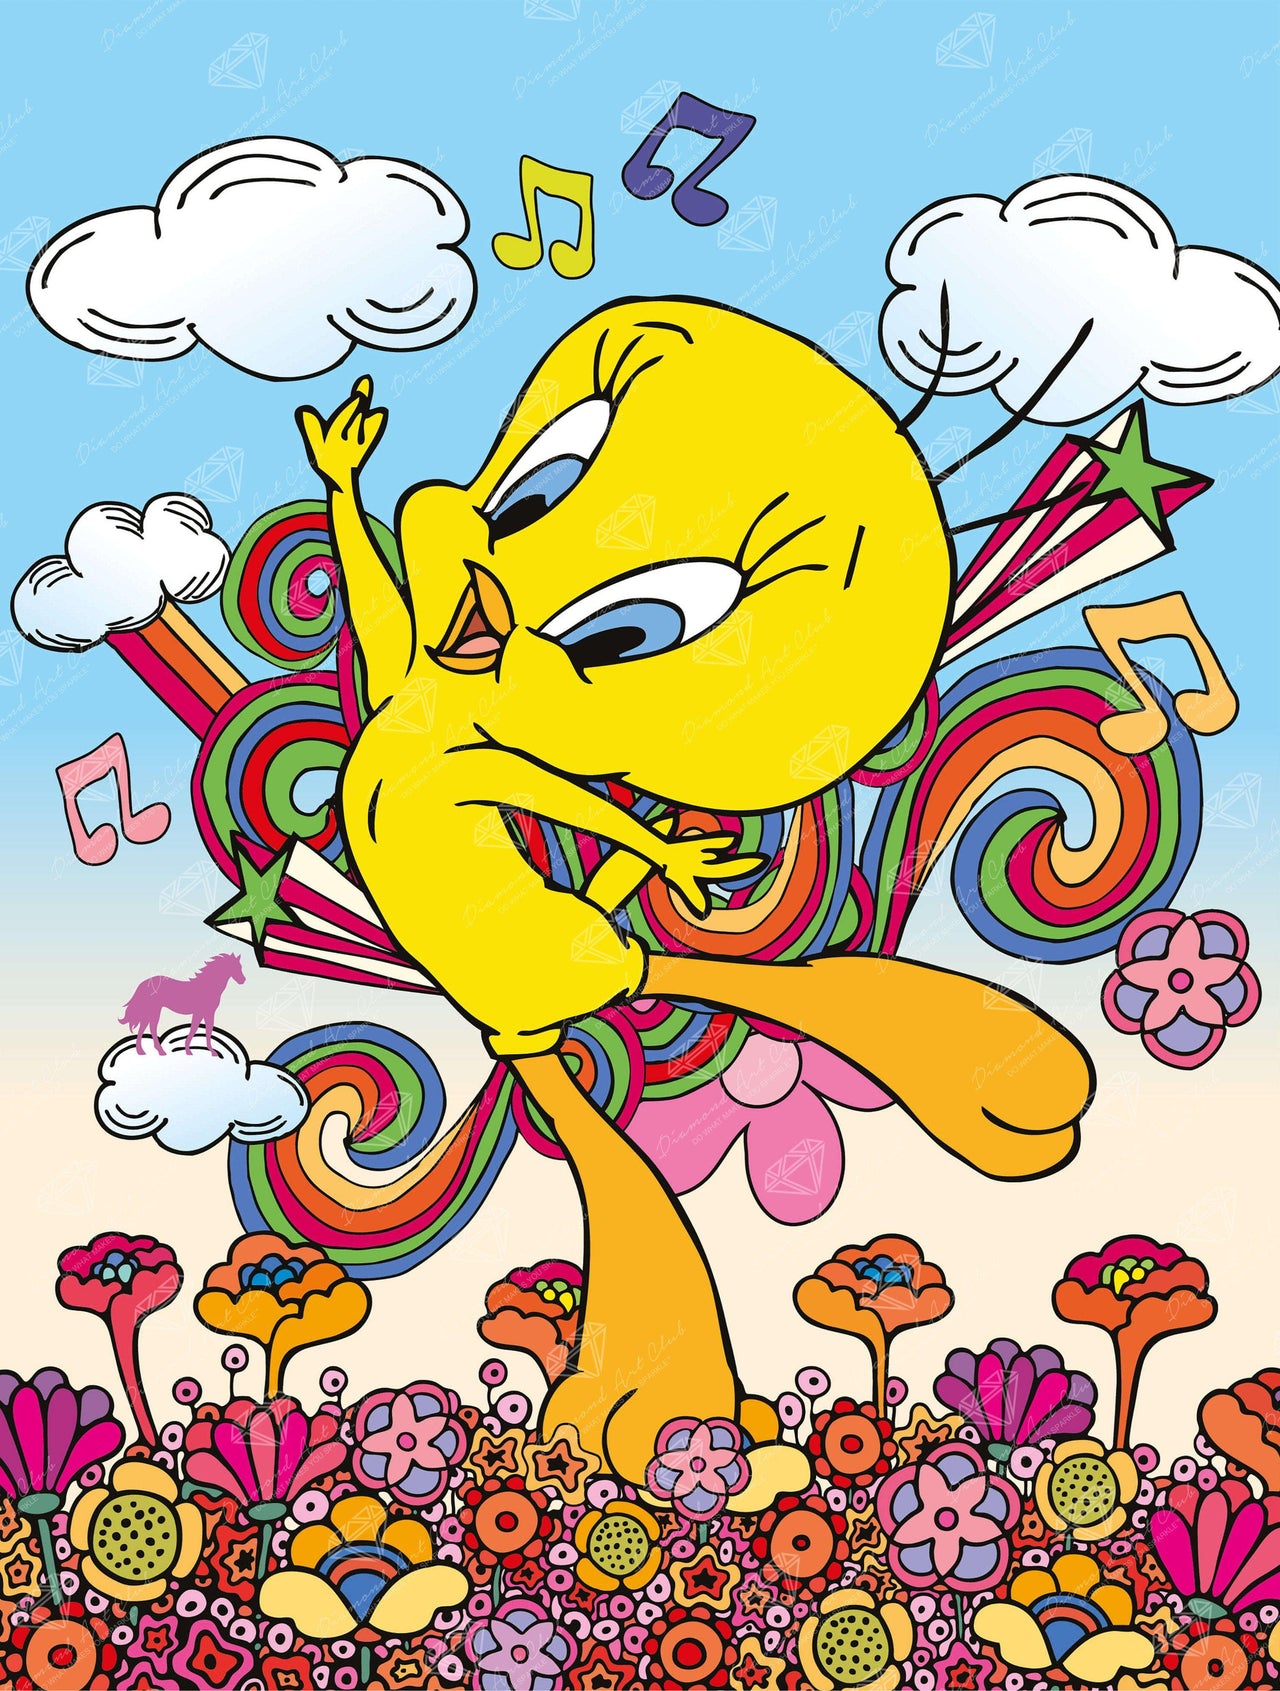 Diamond Painting Psychedelic Dancing Tweety 22" x 29" (56cm x 74cm) / Square With 35 Colors Including 3 ABs / 64,532